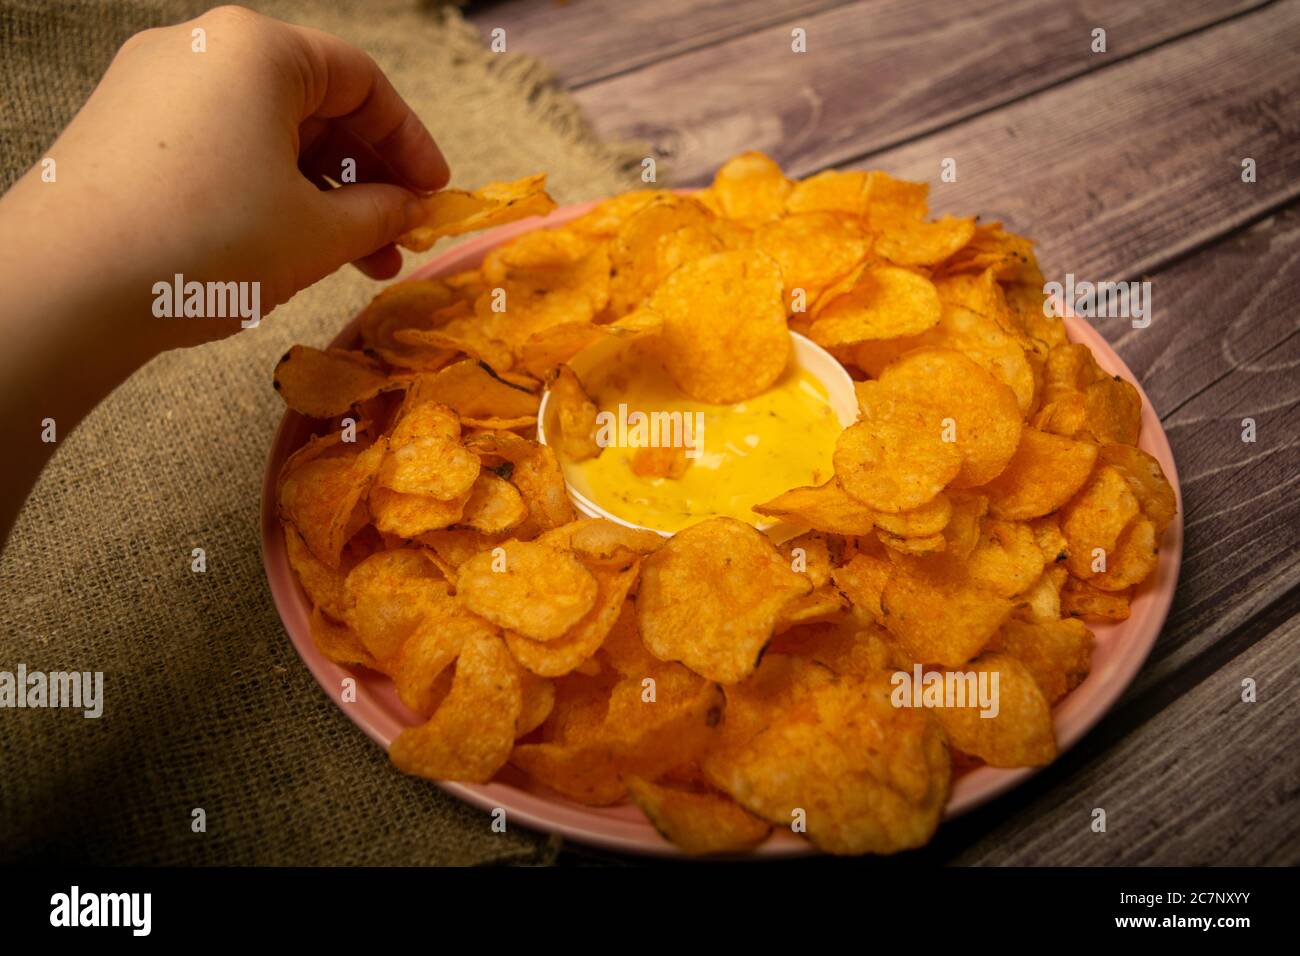 The girl takes a chip from a round dish with potato chips and a saucepan with cheese sauce in the center of the plate. Close up Stock Photo